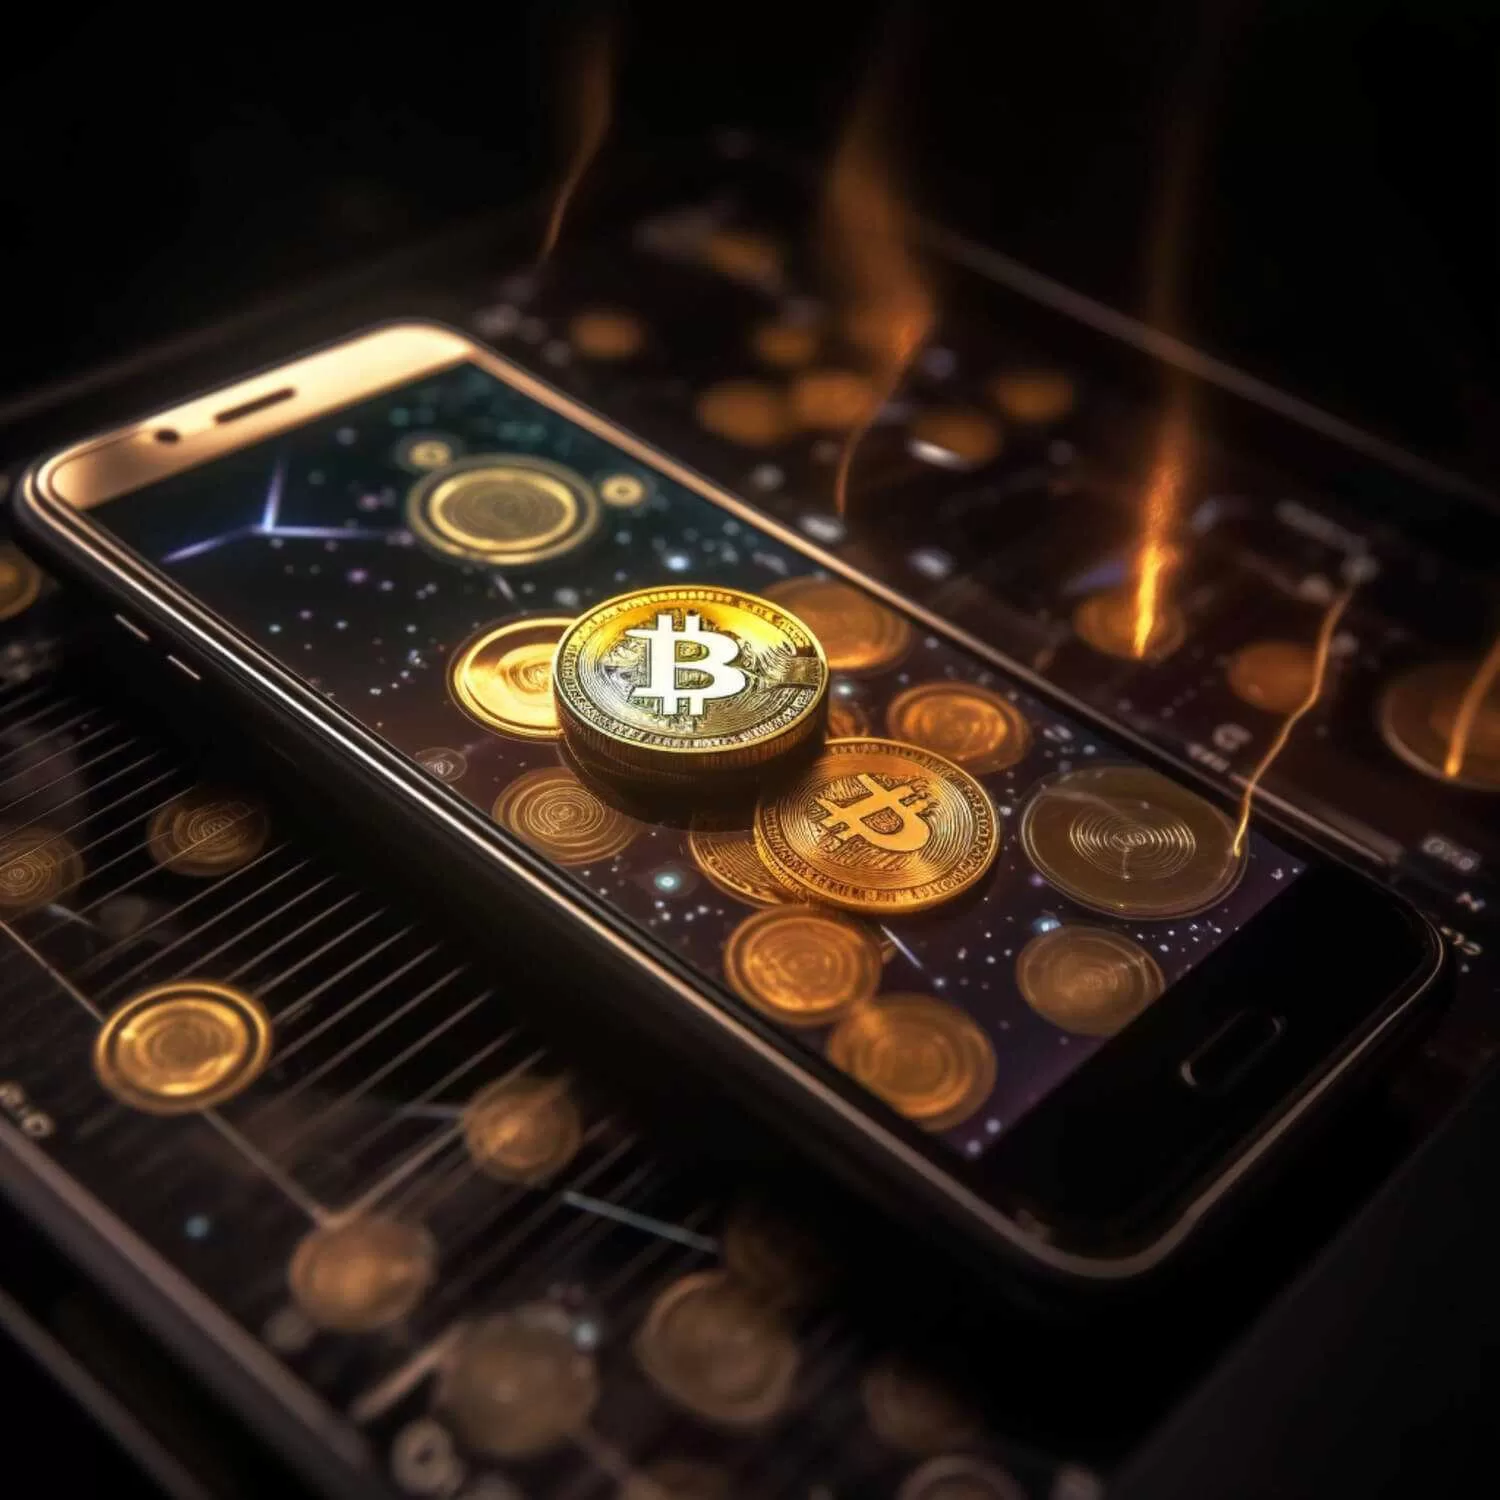 Bitcoin on a phone during the crypto surge